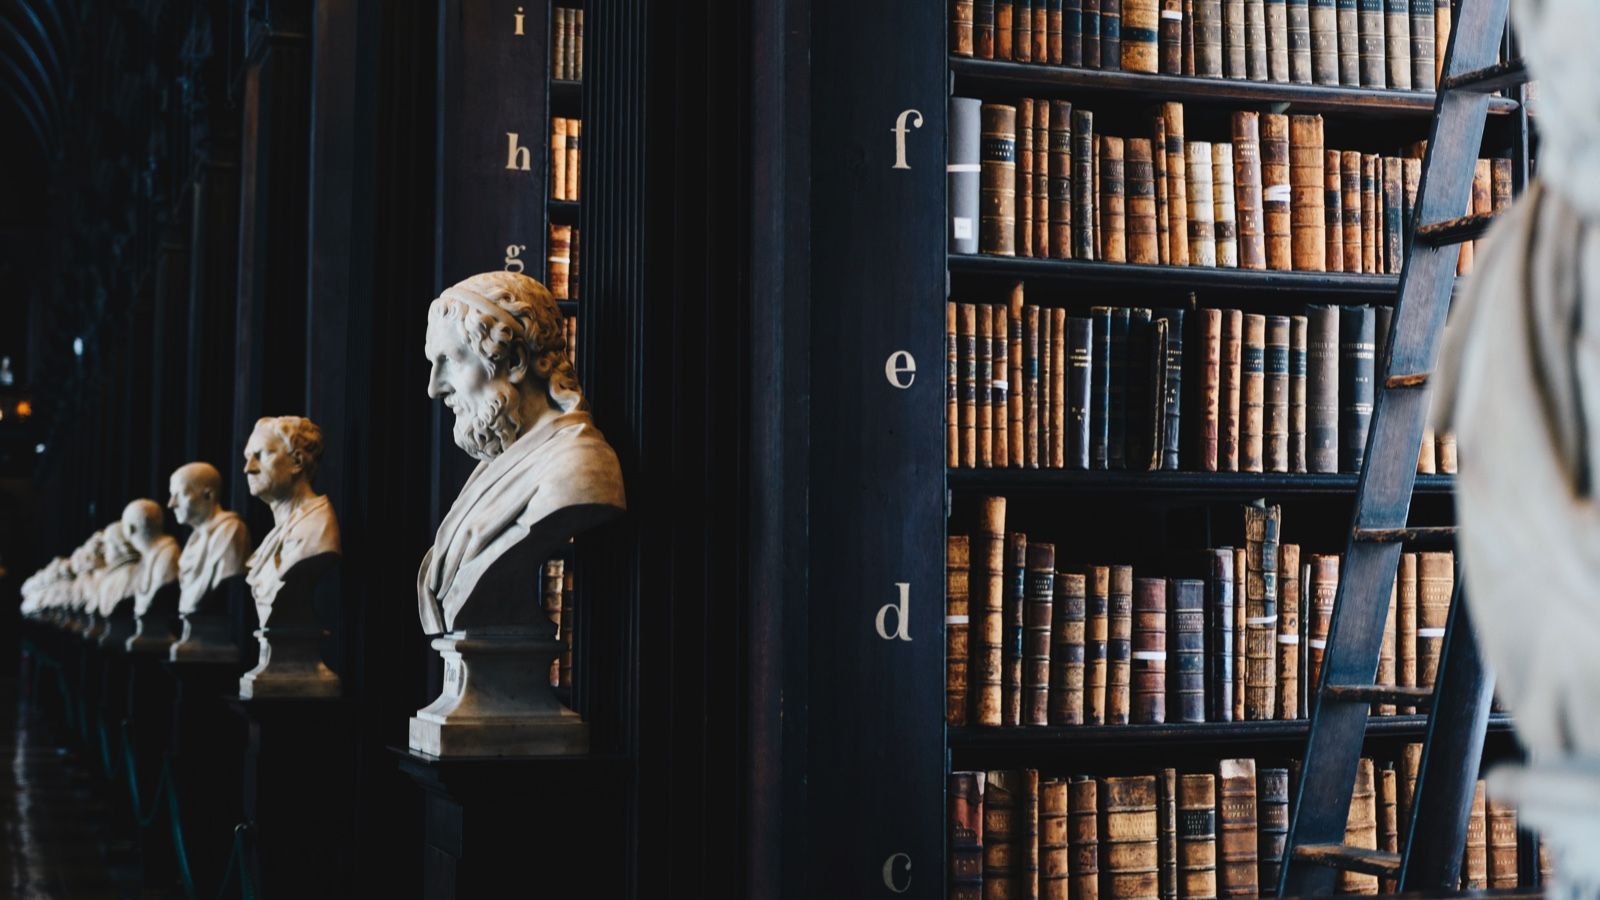 stacks in an academic library of dark wood with marble busts at each bookcase